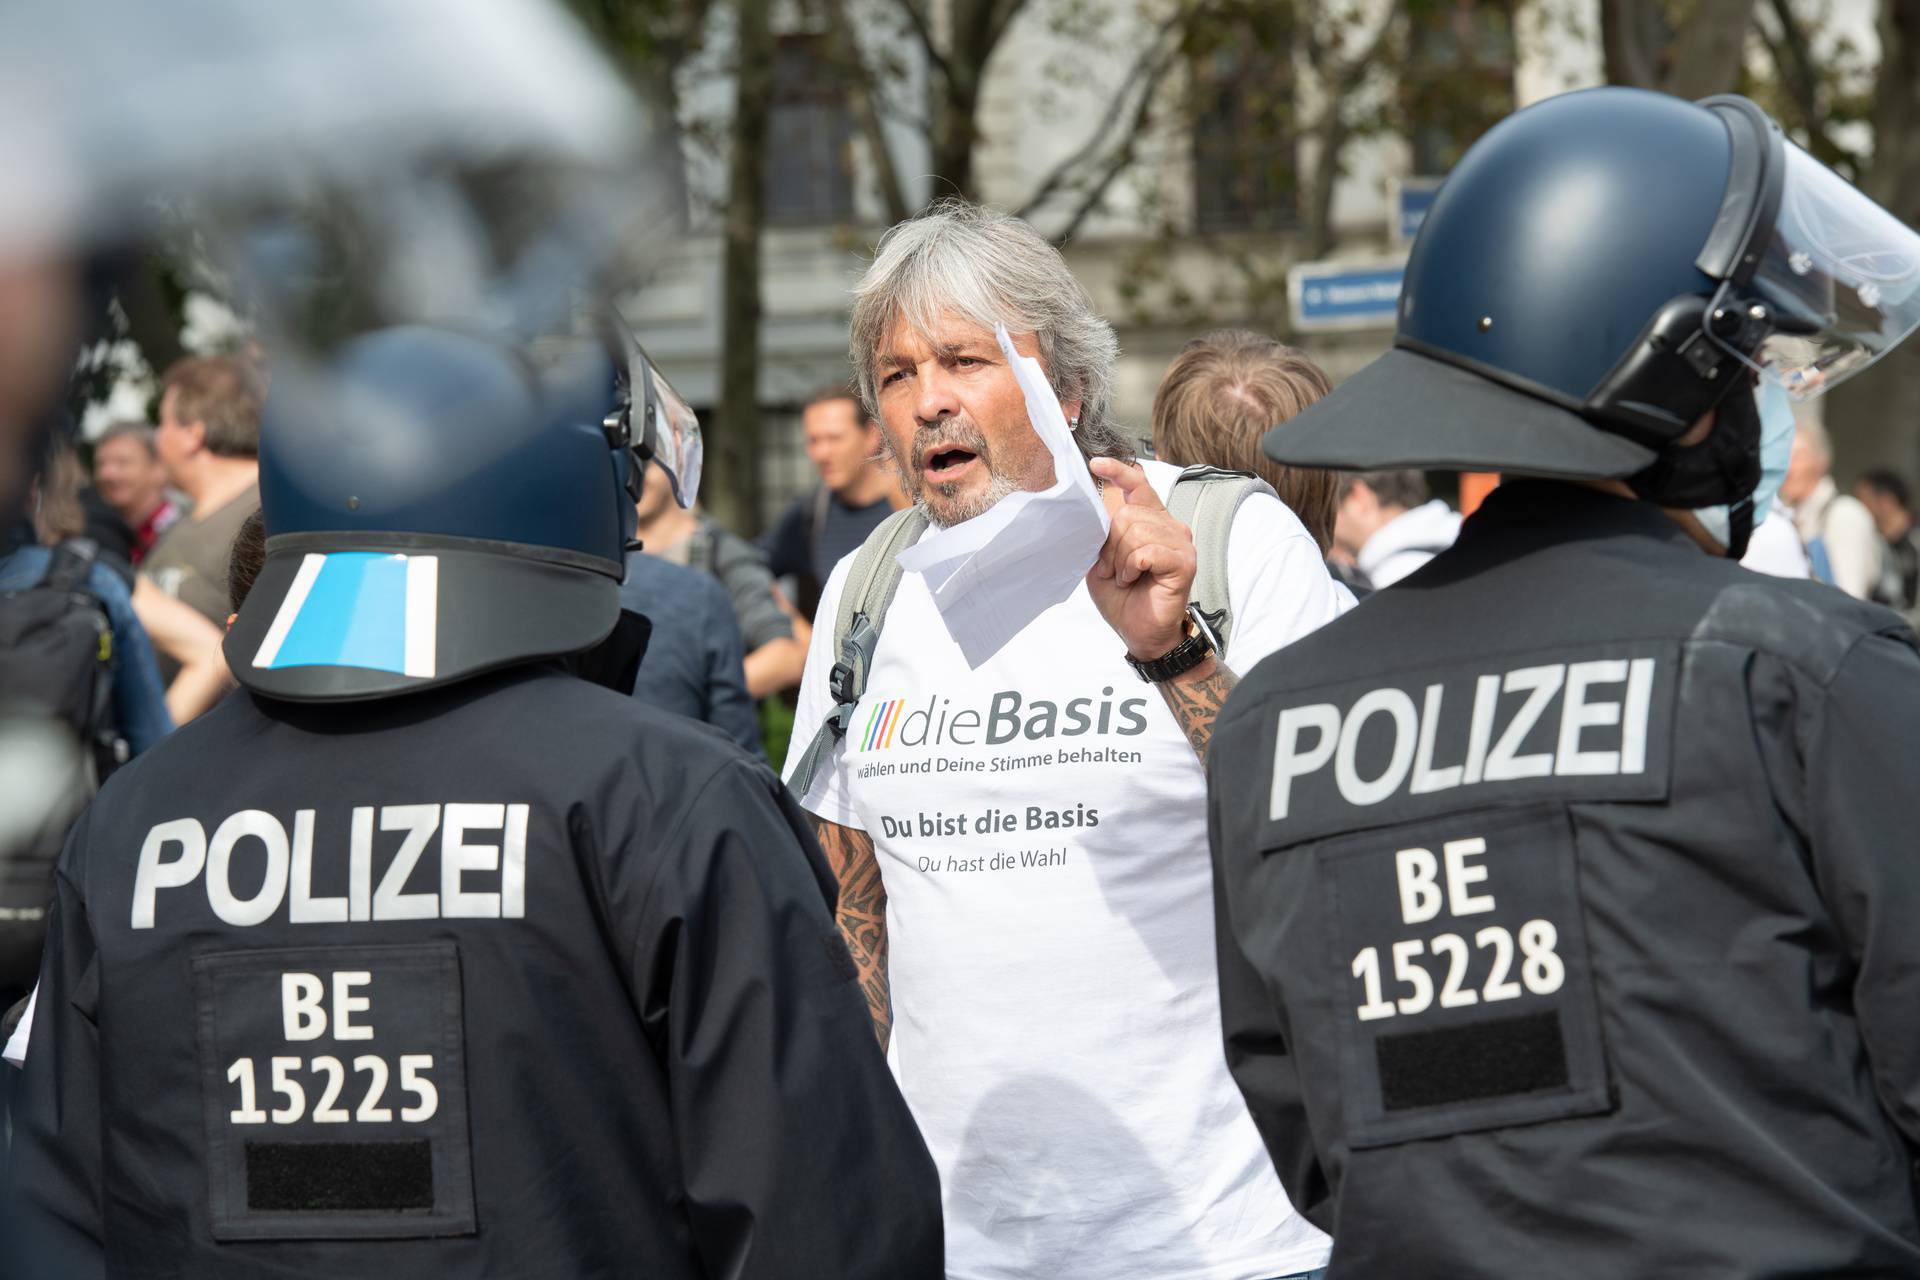 Demonstrations against Corona policy in Berlin